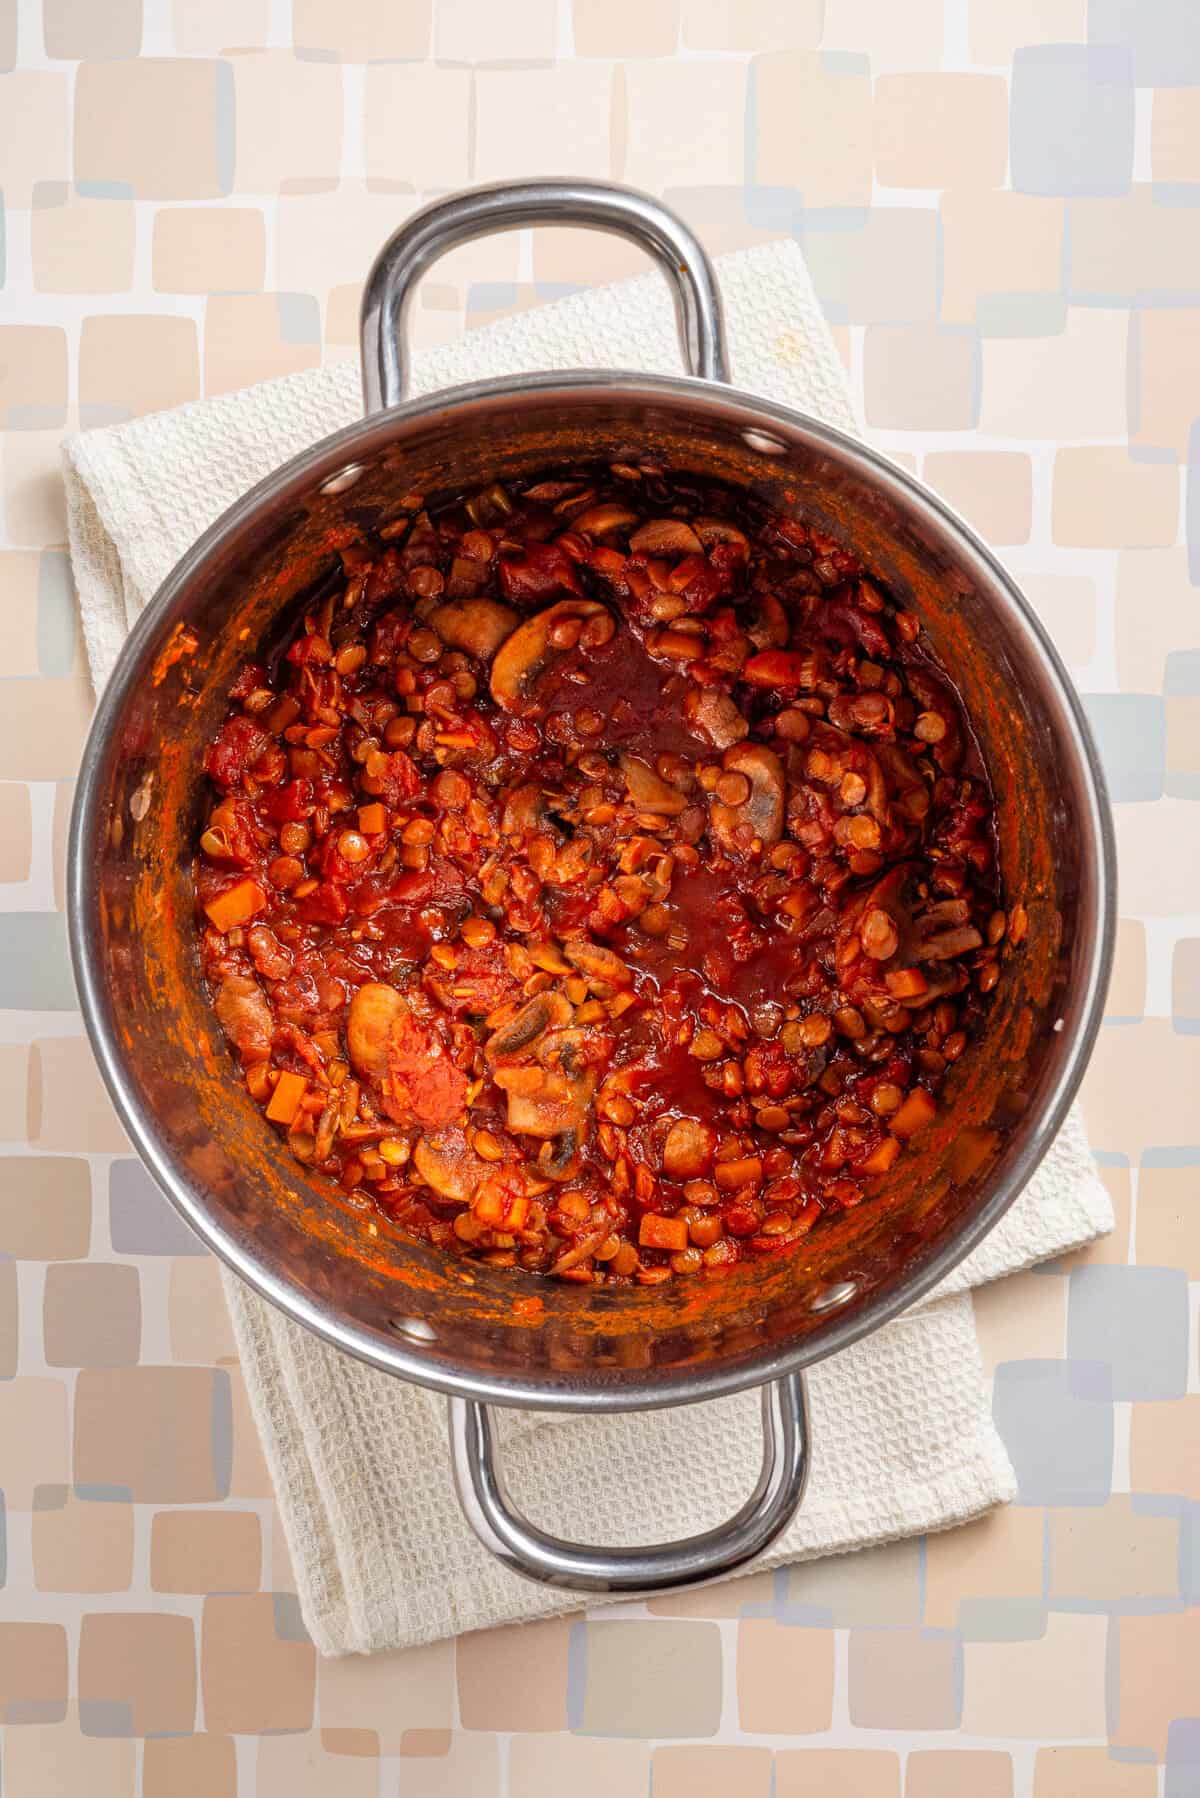 An image of cooked vegan bolognese in a saucepan.